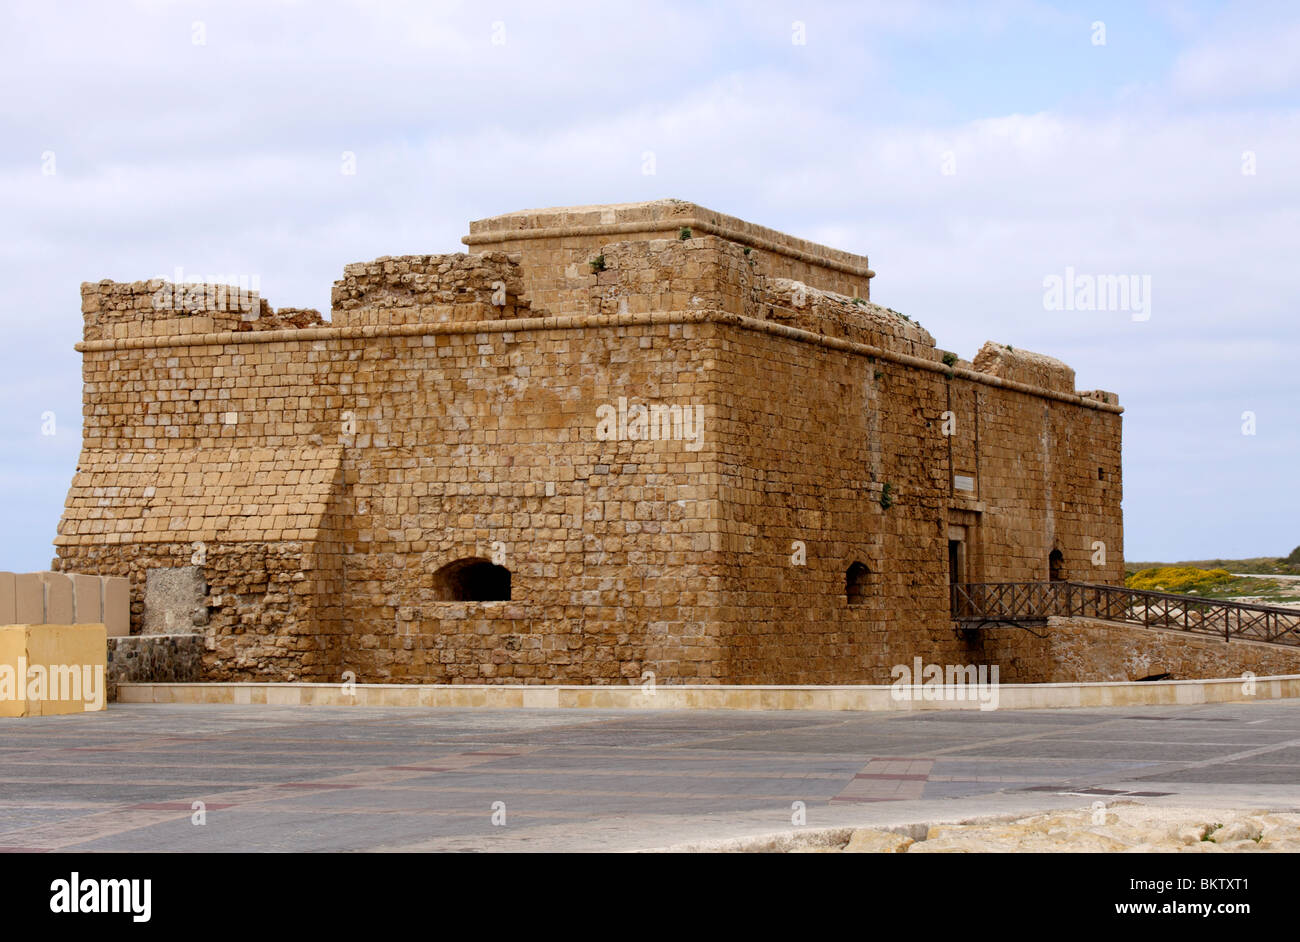 PAPHOS CASTLE ON THE ISLAND OF CYPRUS. EUROPE. Stock Photo